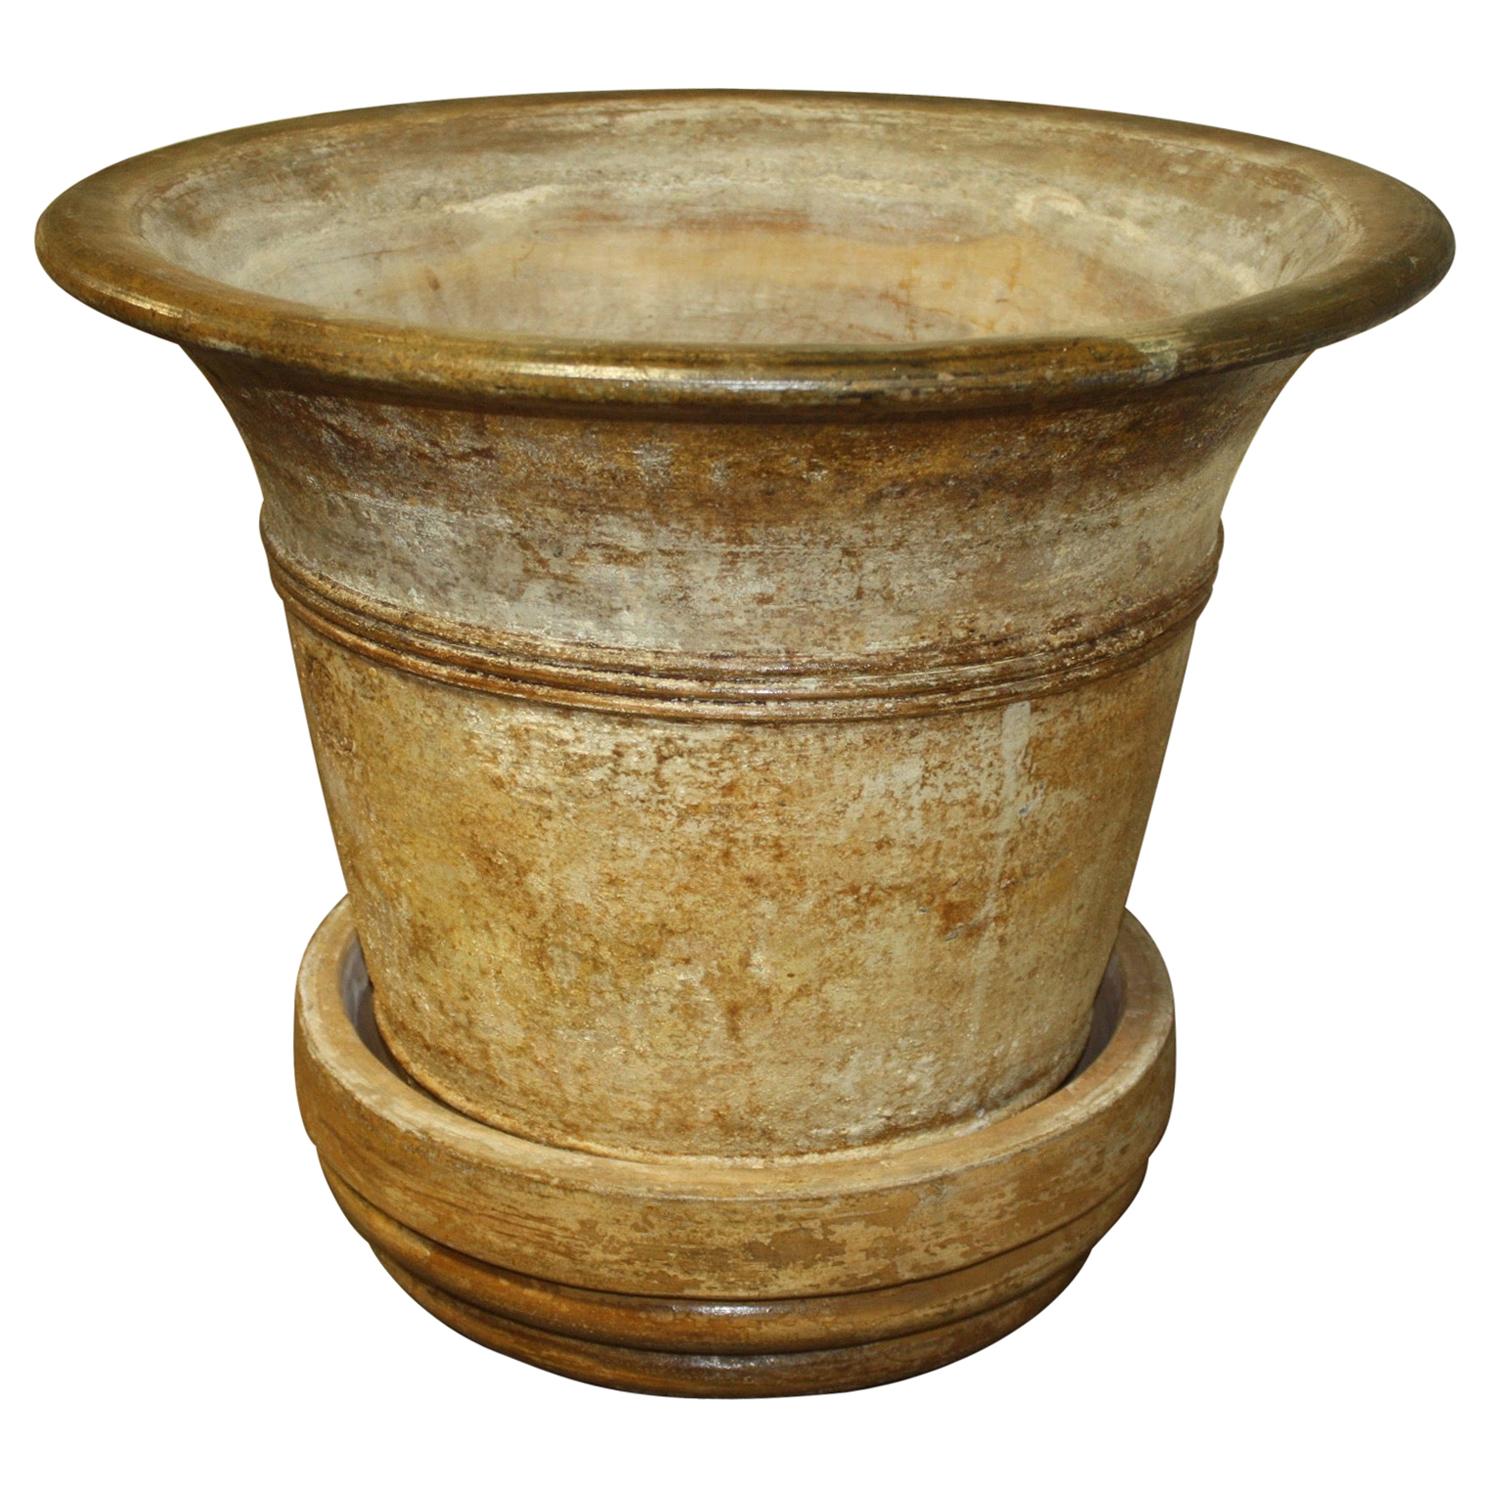 Early 20th Century French Terracotta Planter